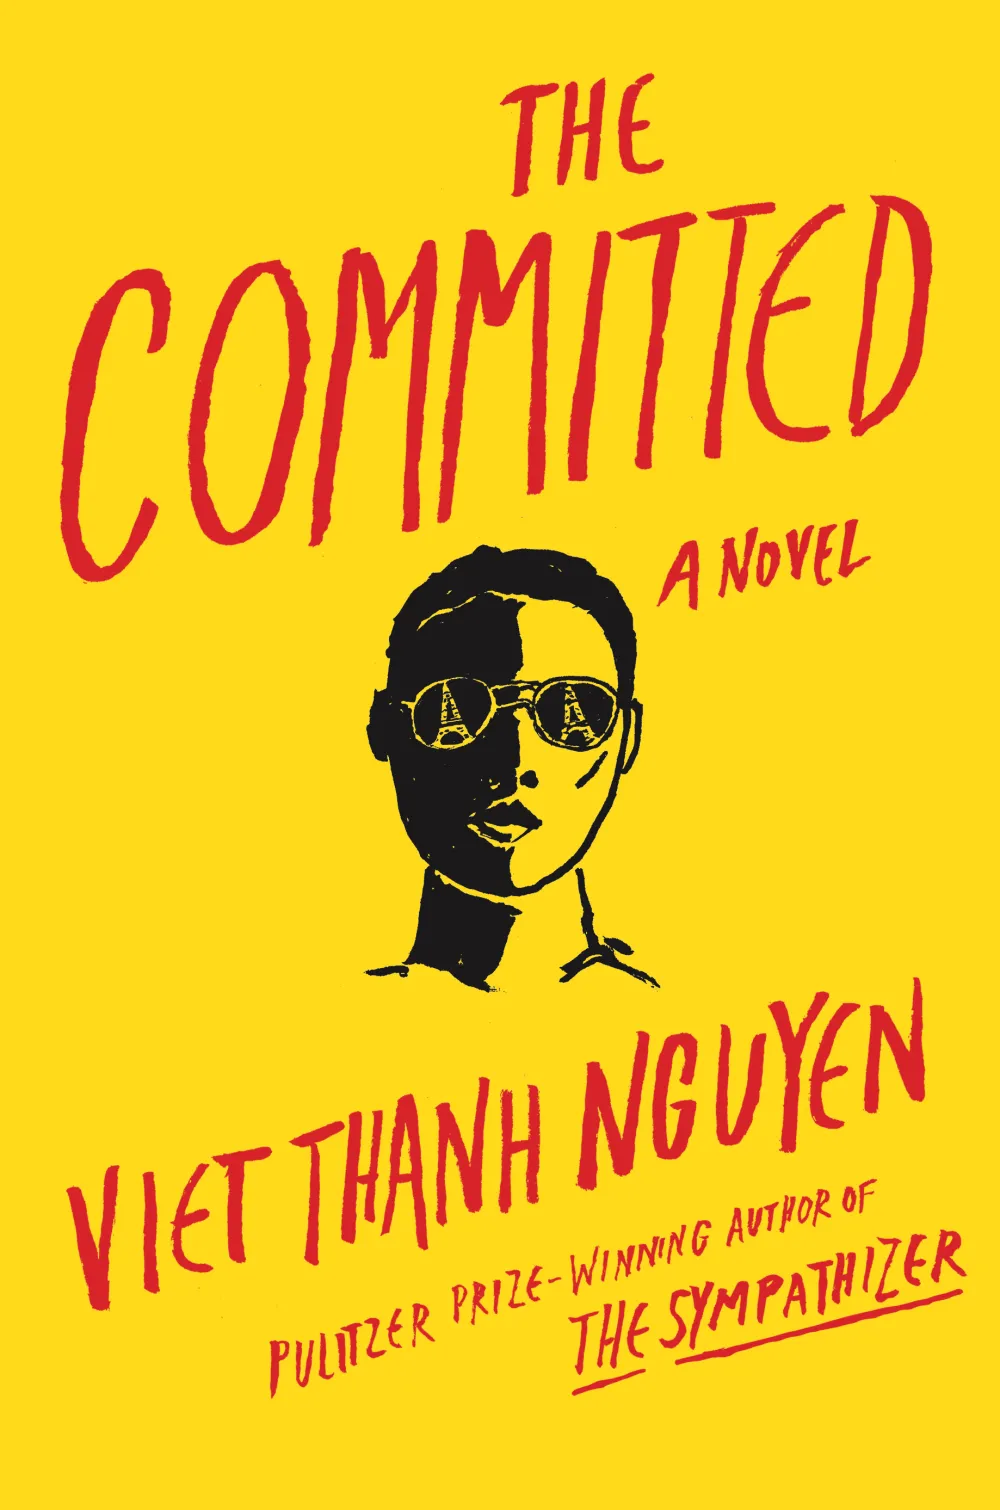 Book cover yellow with red text showing a black and white sketch of a man's face